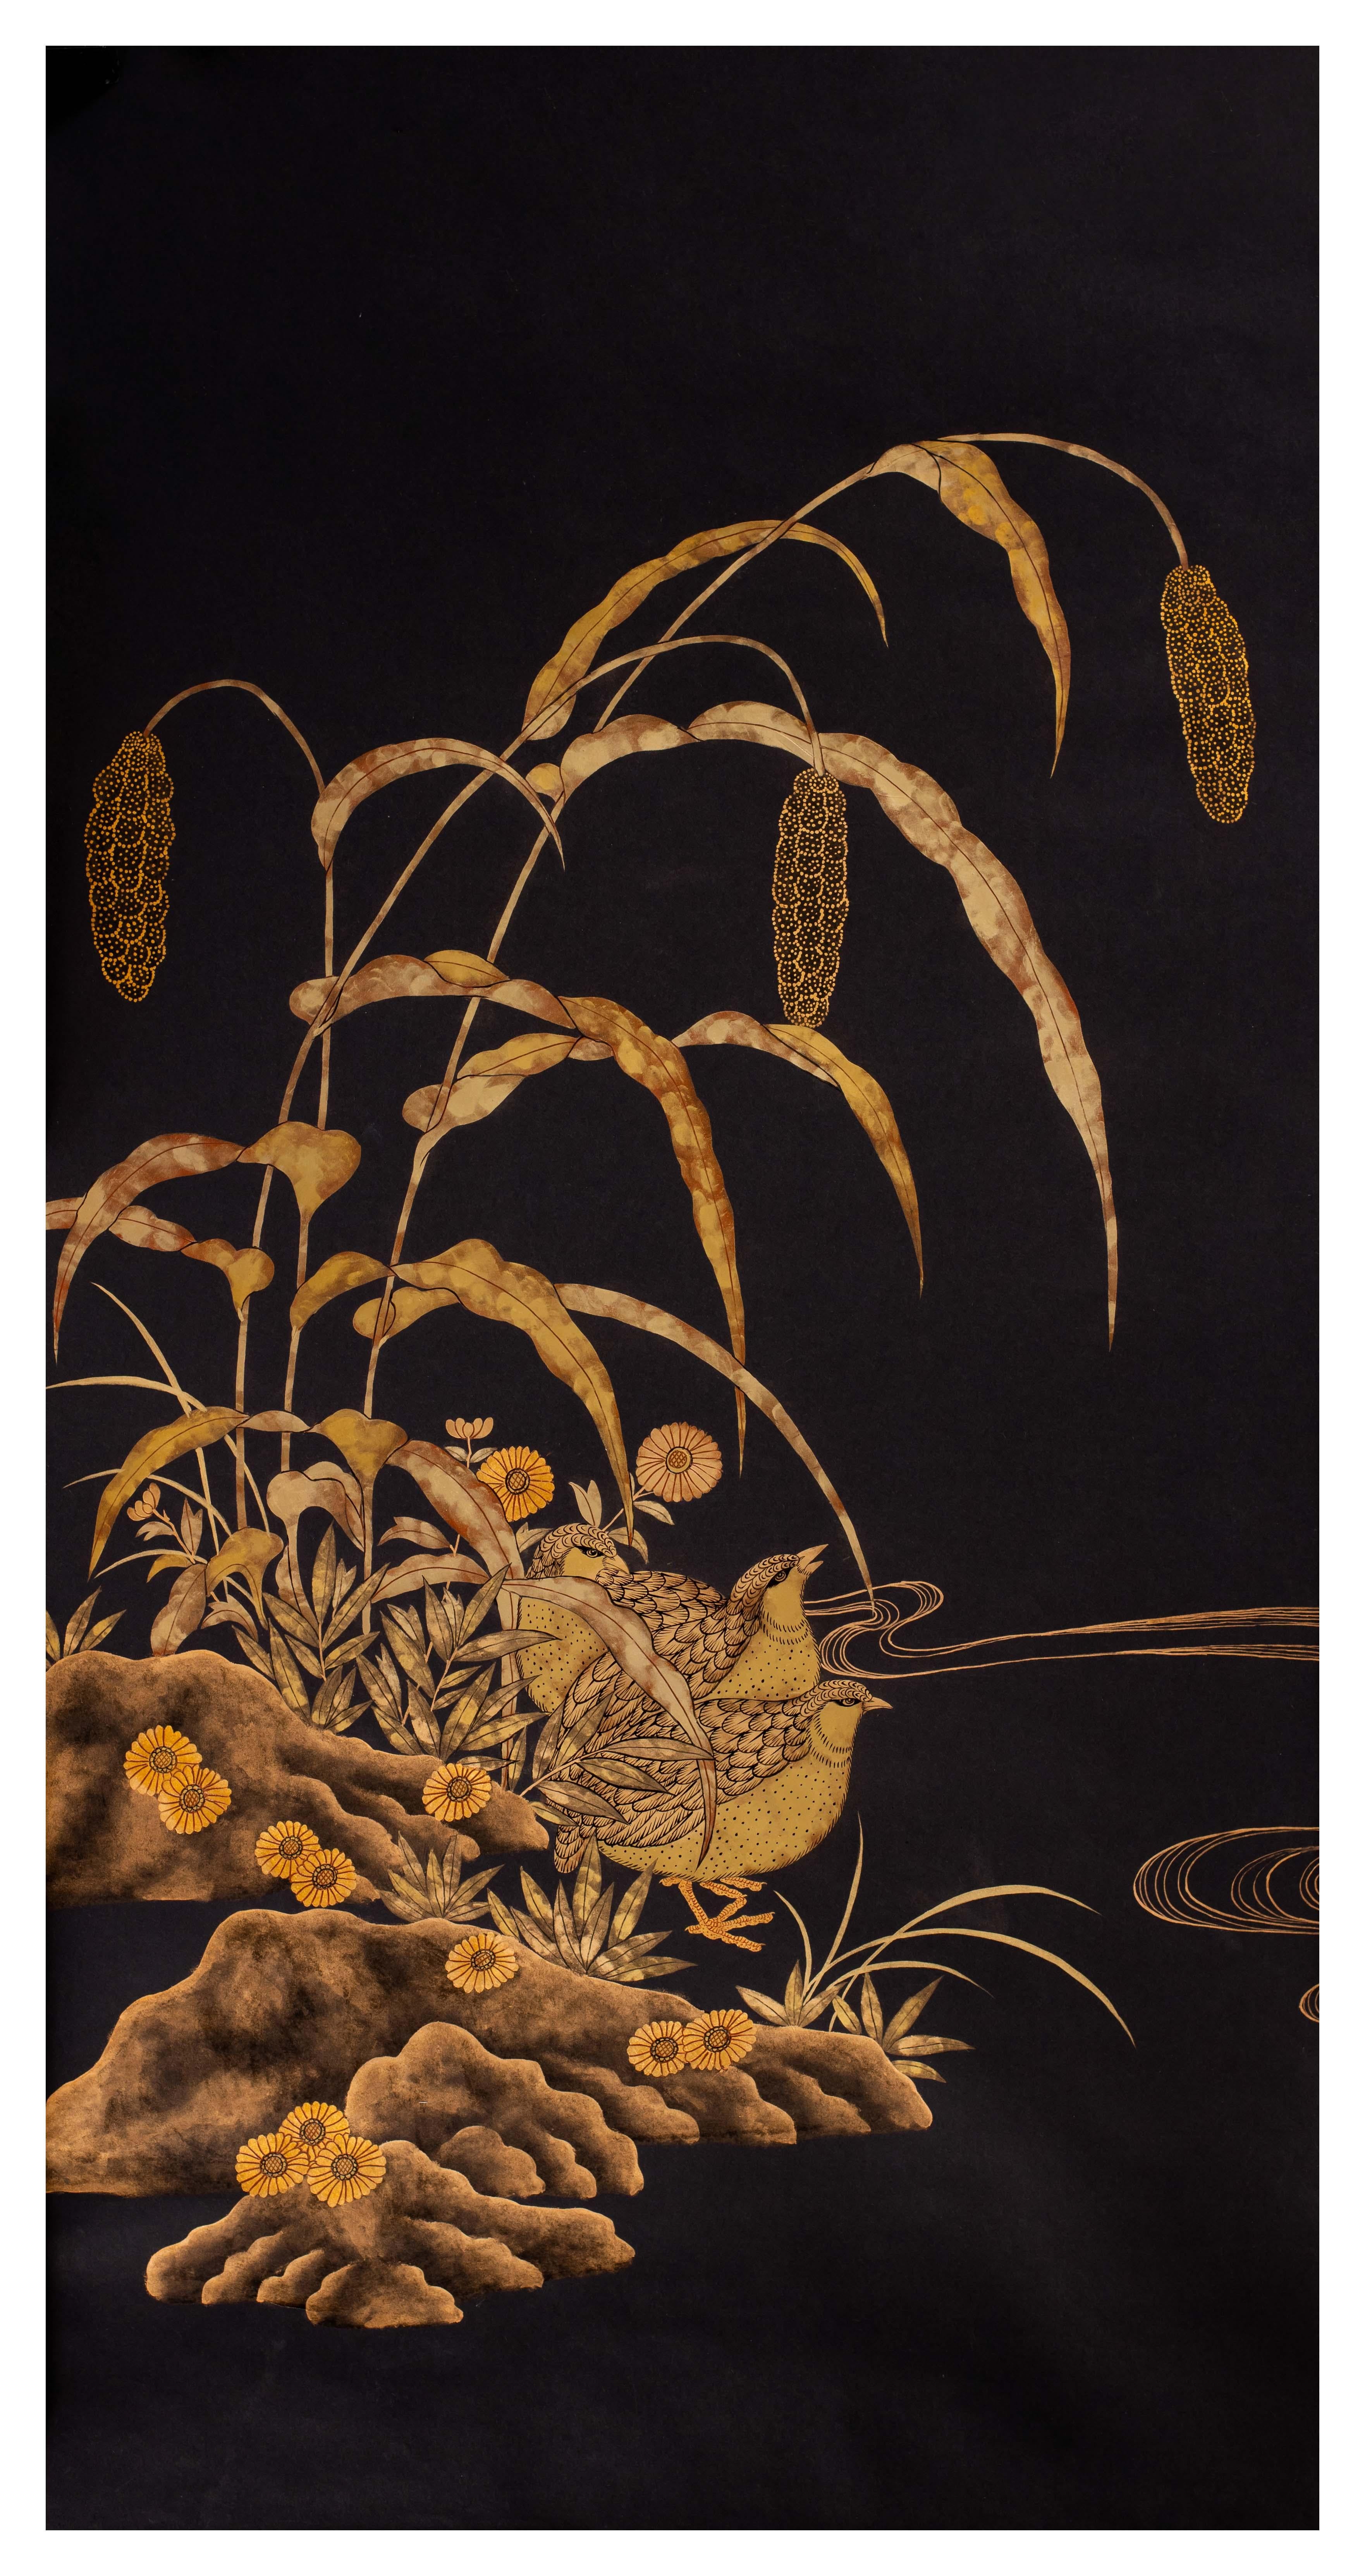 The fine pair of wallpaper panels was hand-painted in gilt paint on rice paper, reproducing the 19th century Chinese export chinoiserie painting of golden grouse in grasses on export wallpaper, from our studio. An antiquing process is applied to the